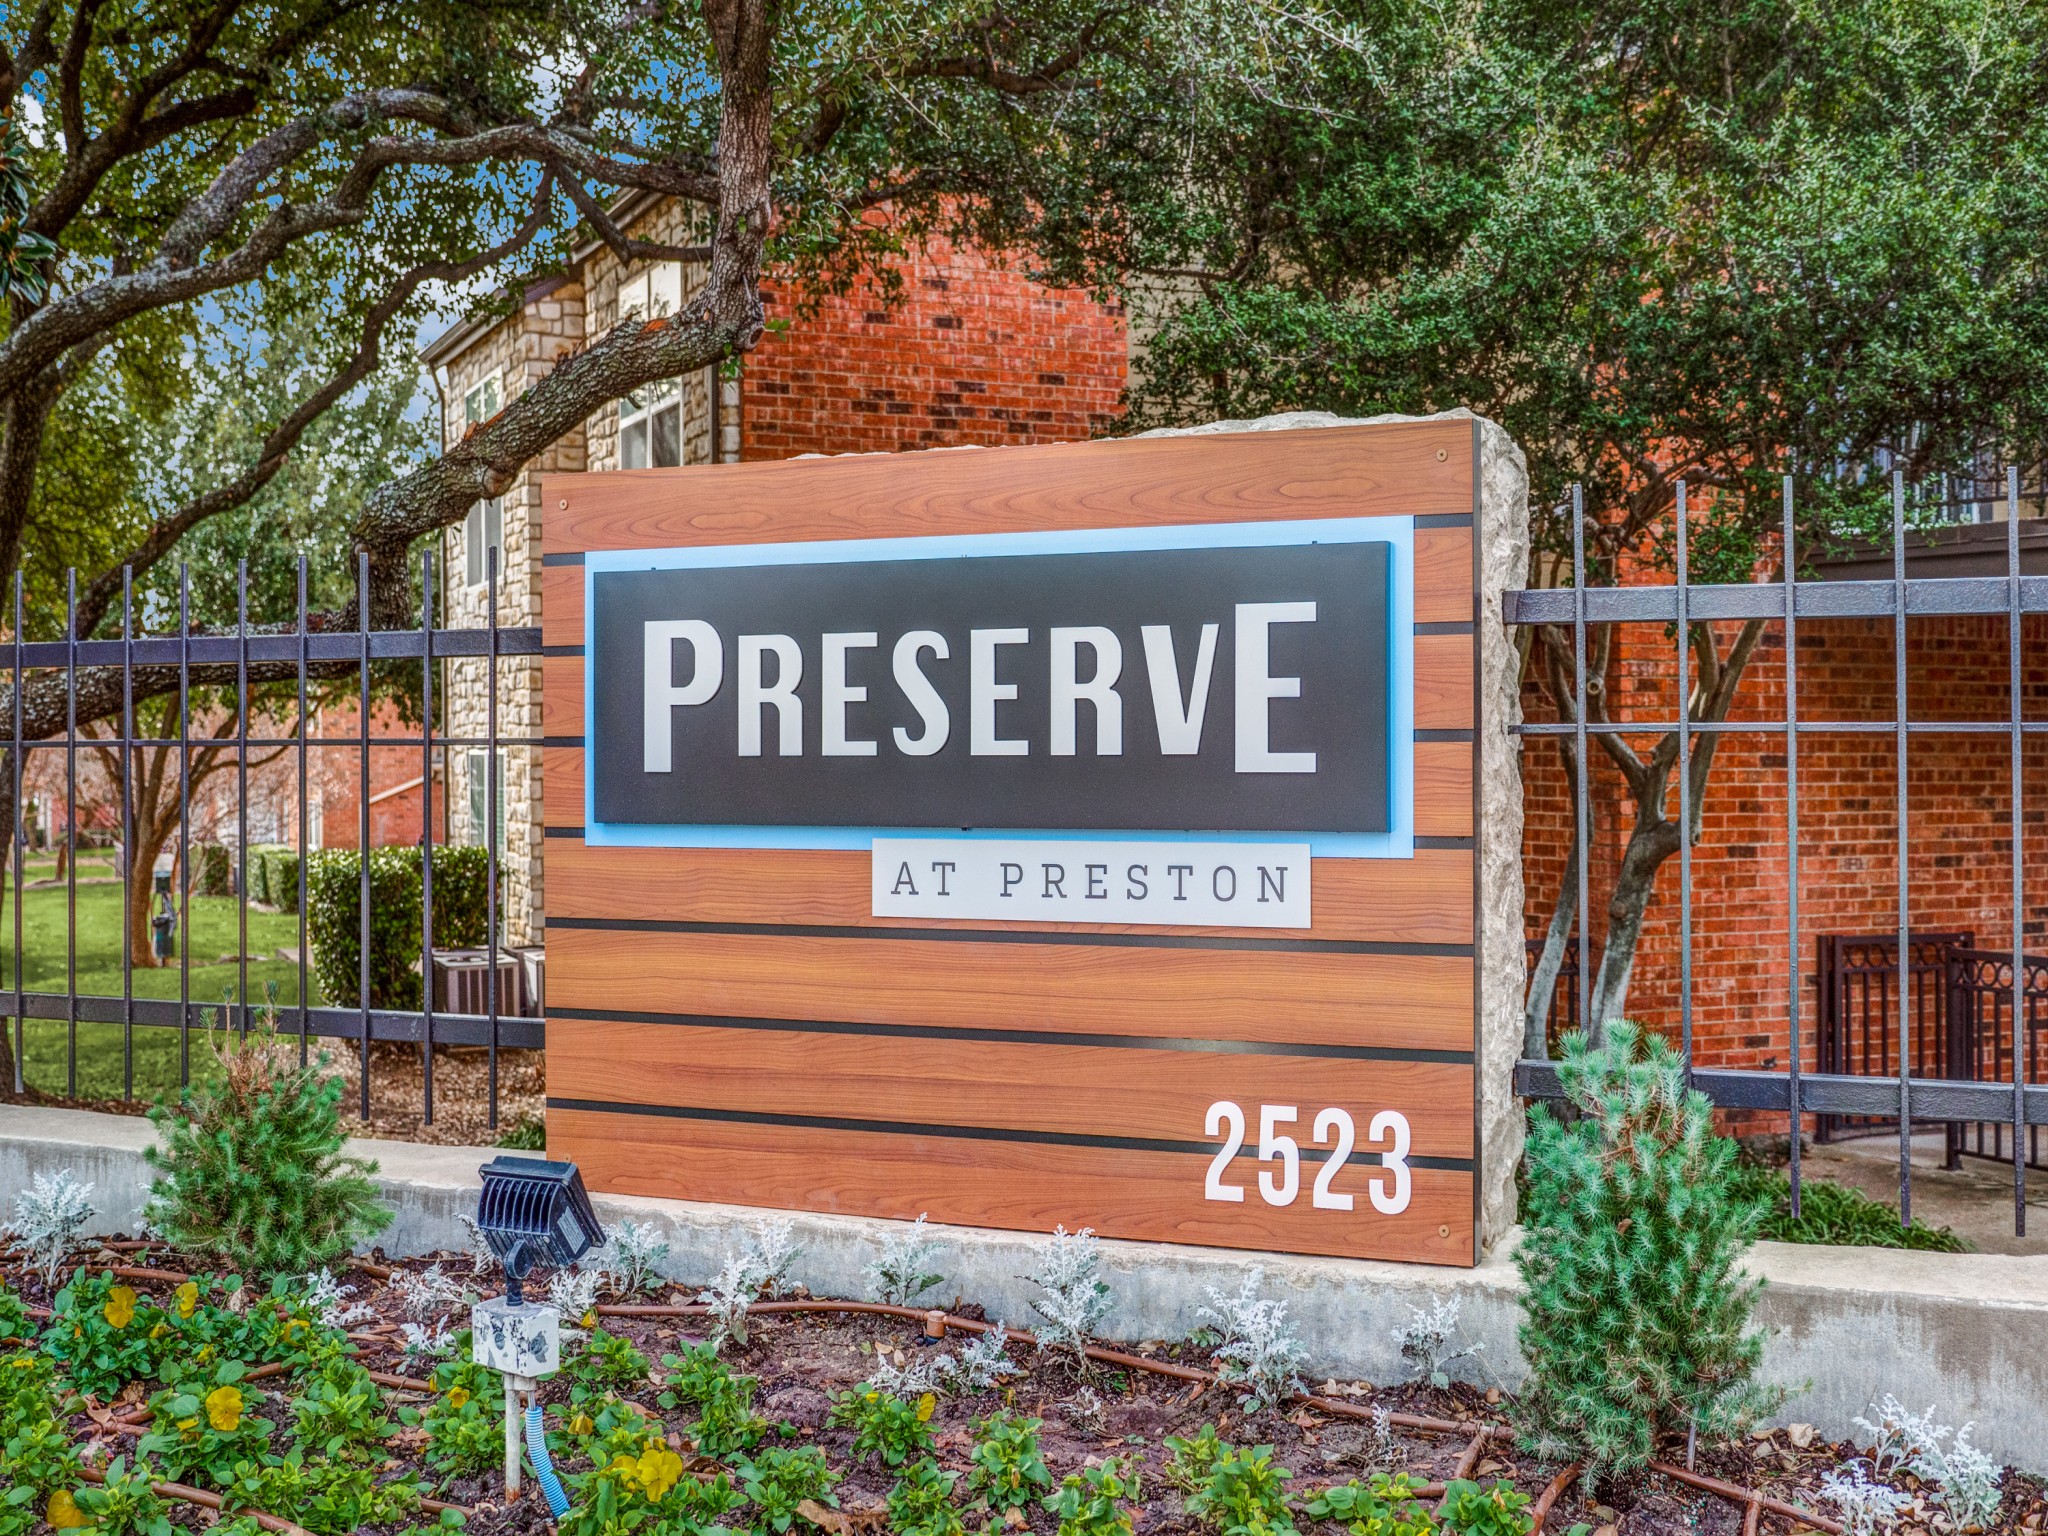 The Preserve at Preston signage at front